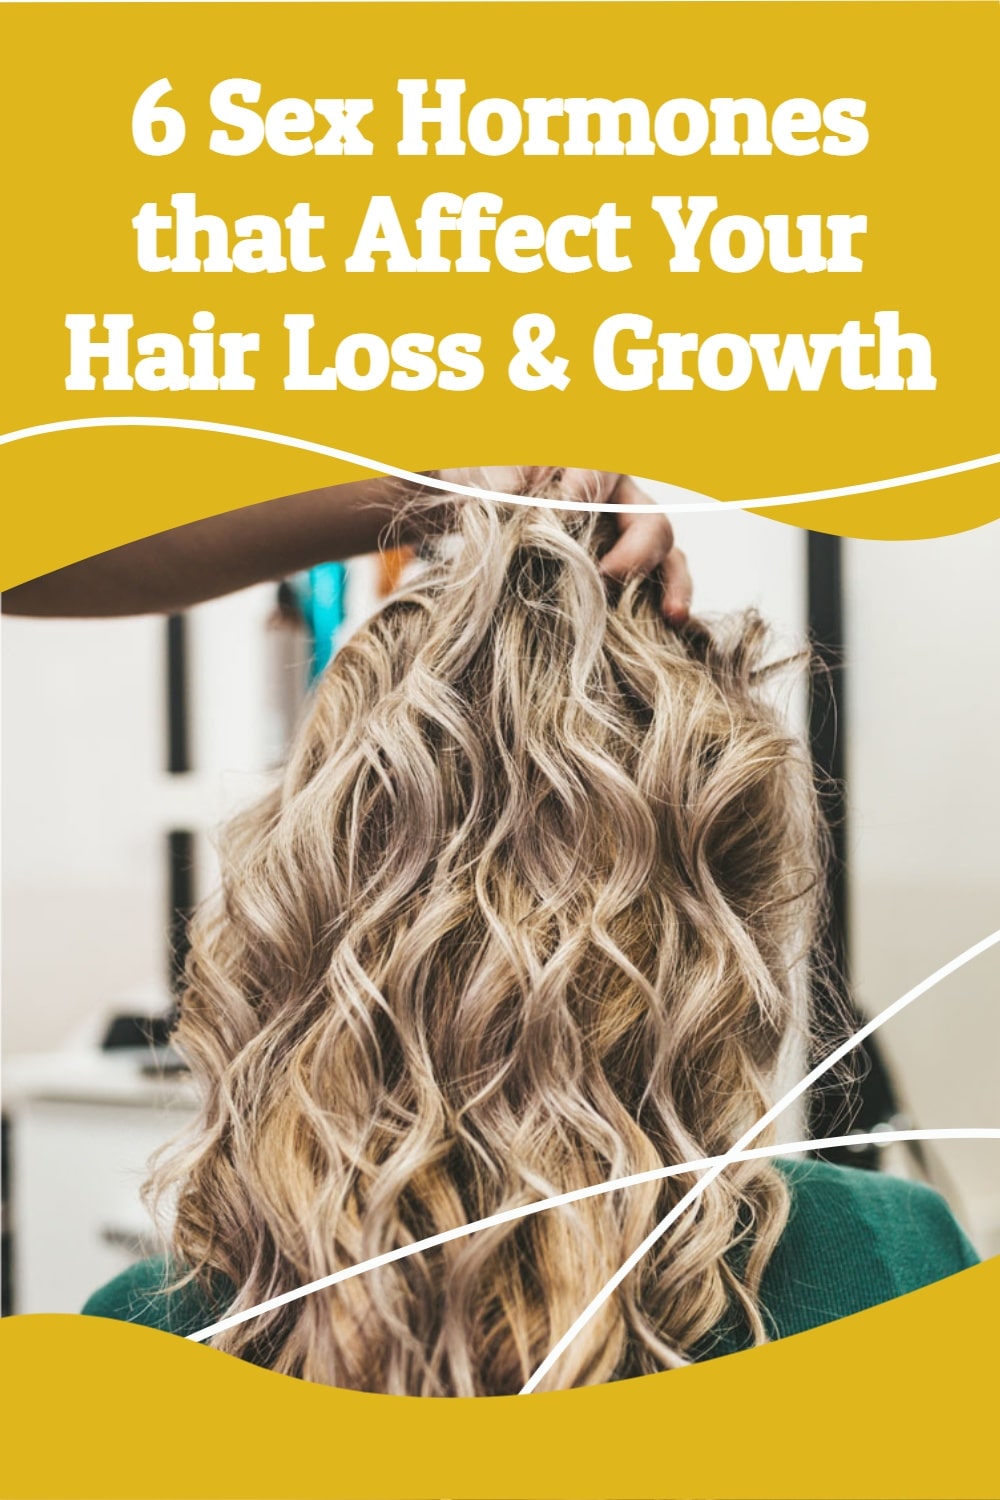 6-Sex-Hormones-that-Affect-Your-Hair-Loss-&-Growth